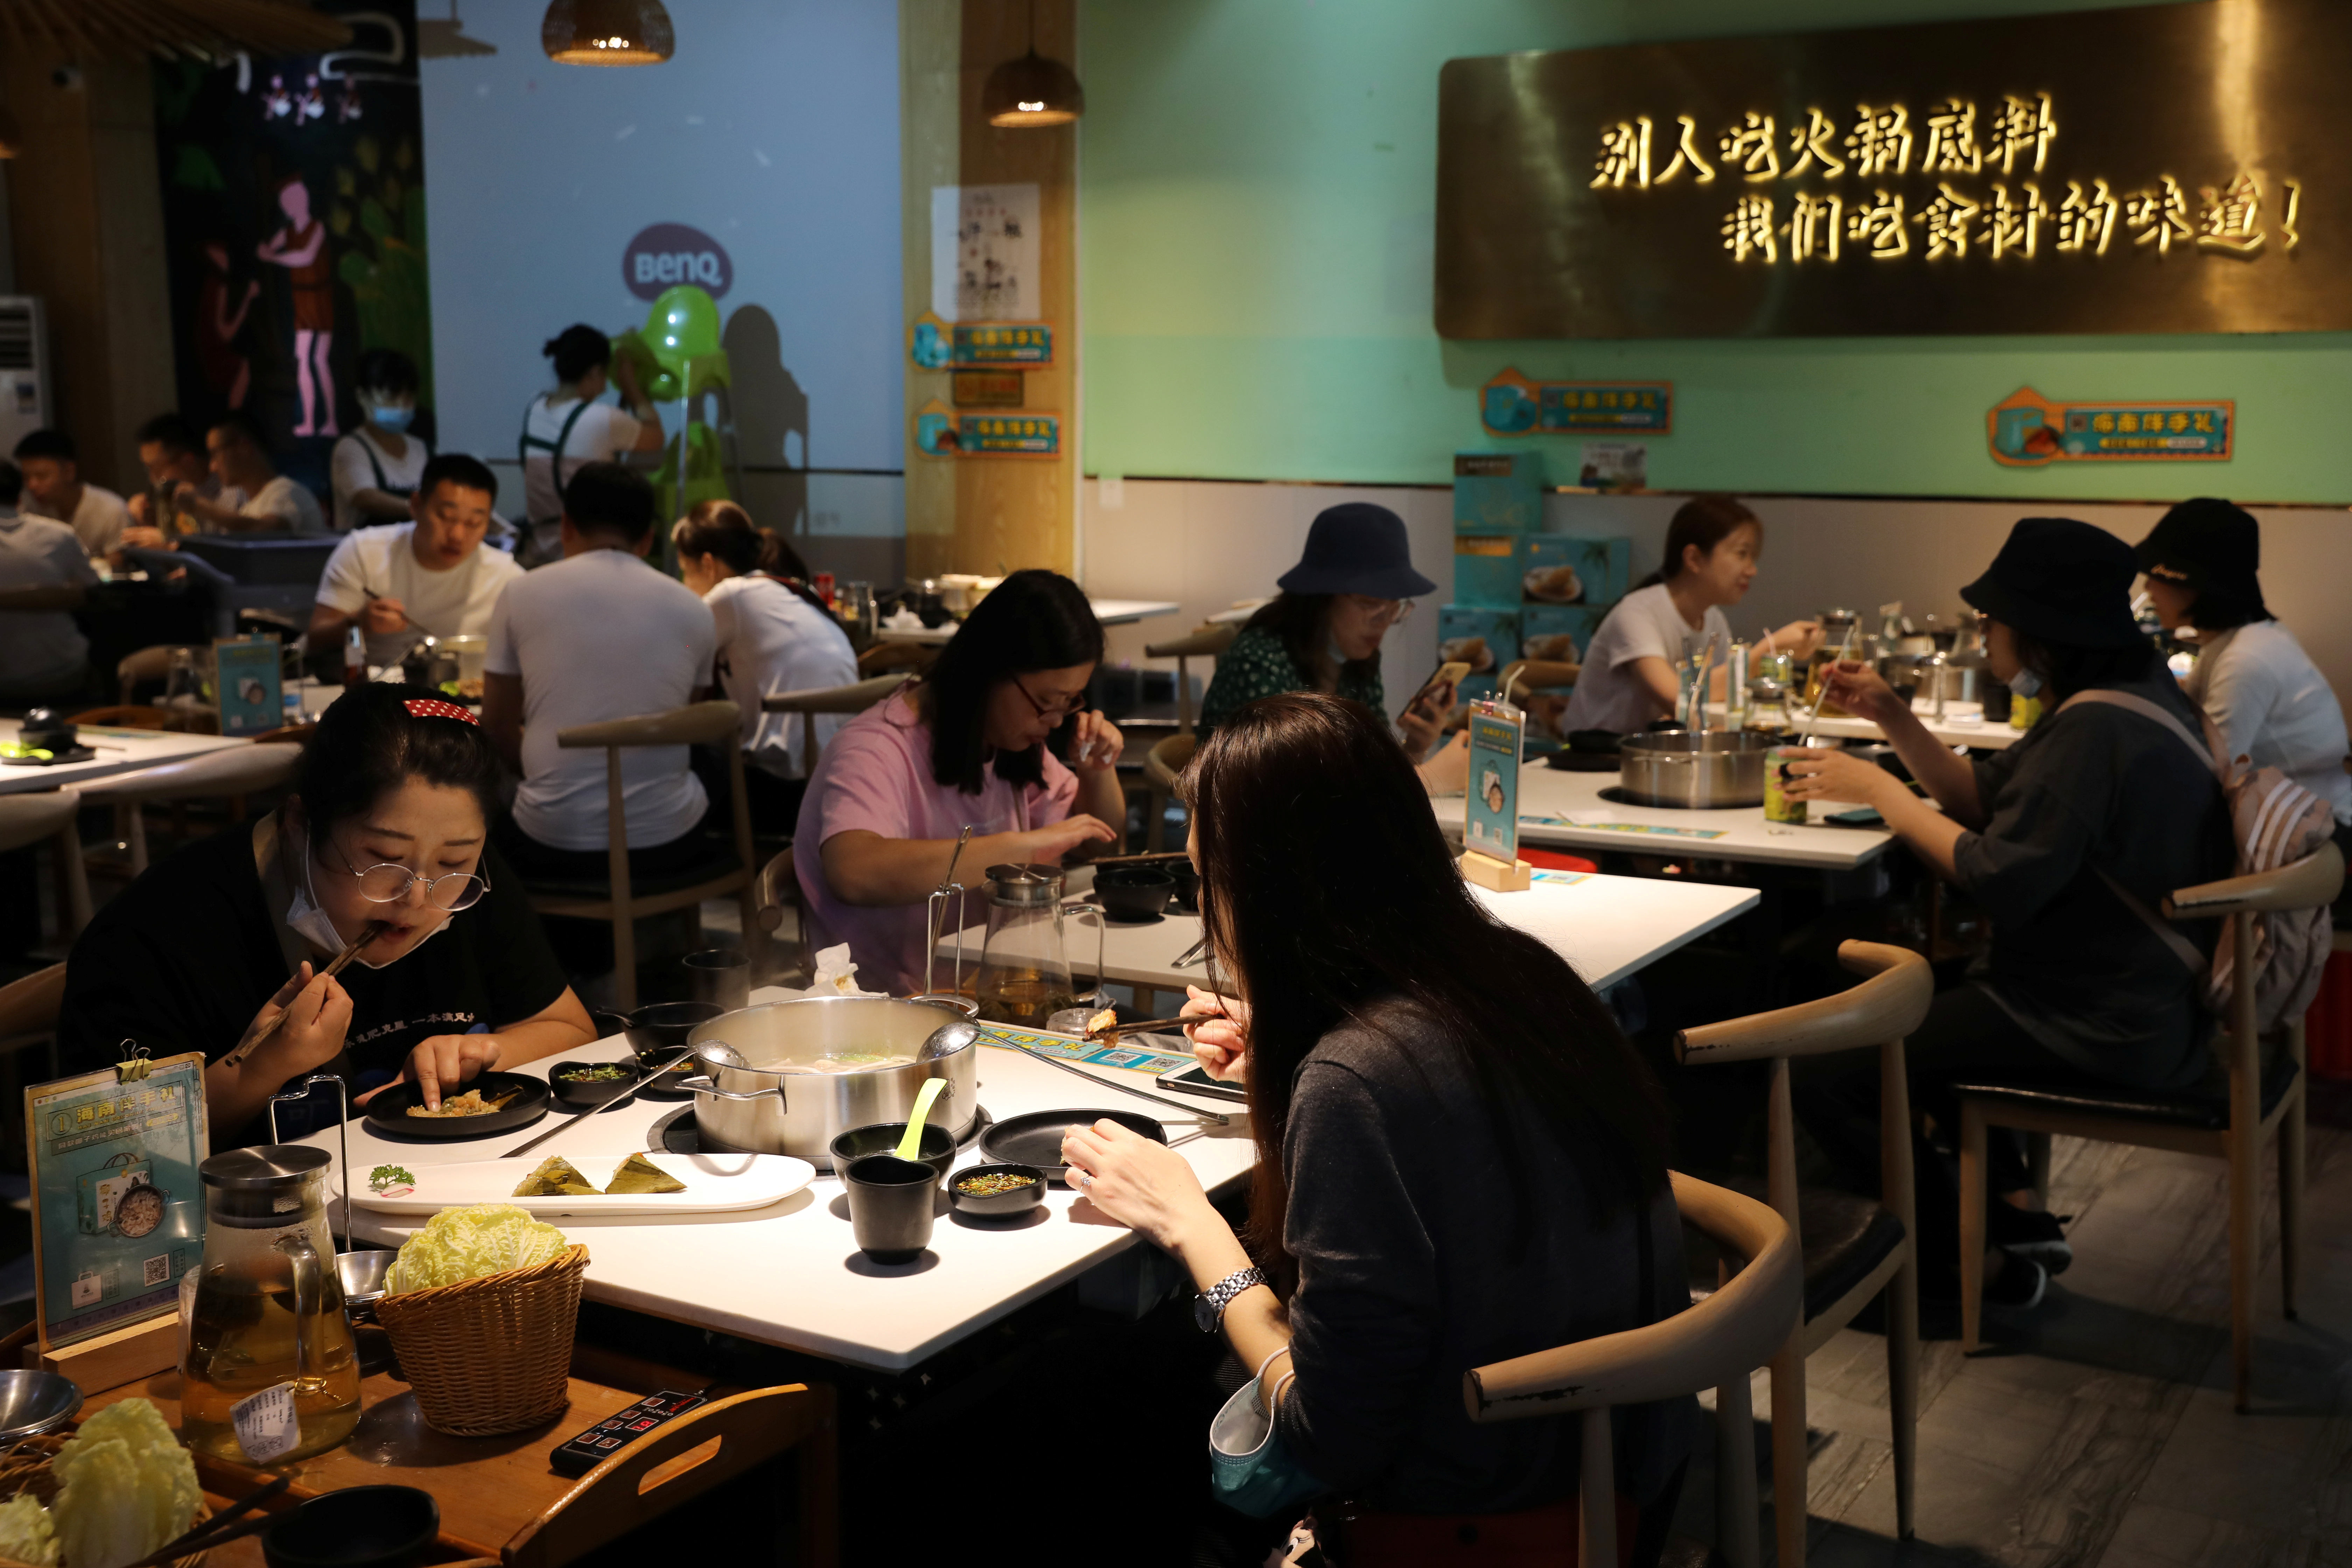 People dine at a hotpot restaurant in Sanya